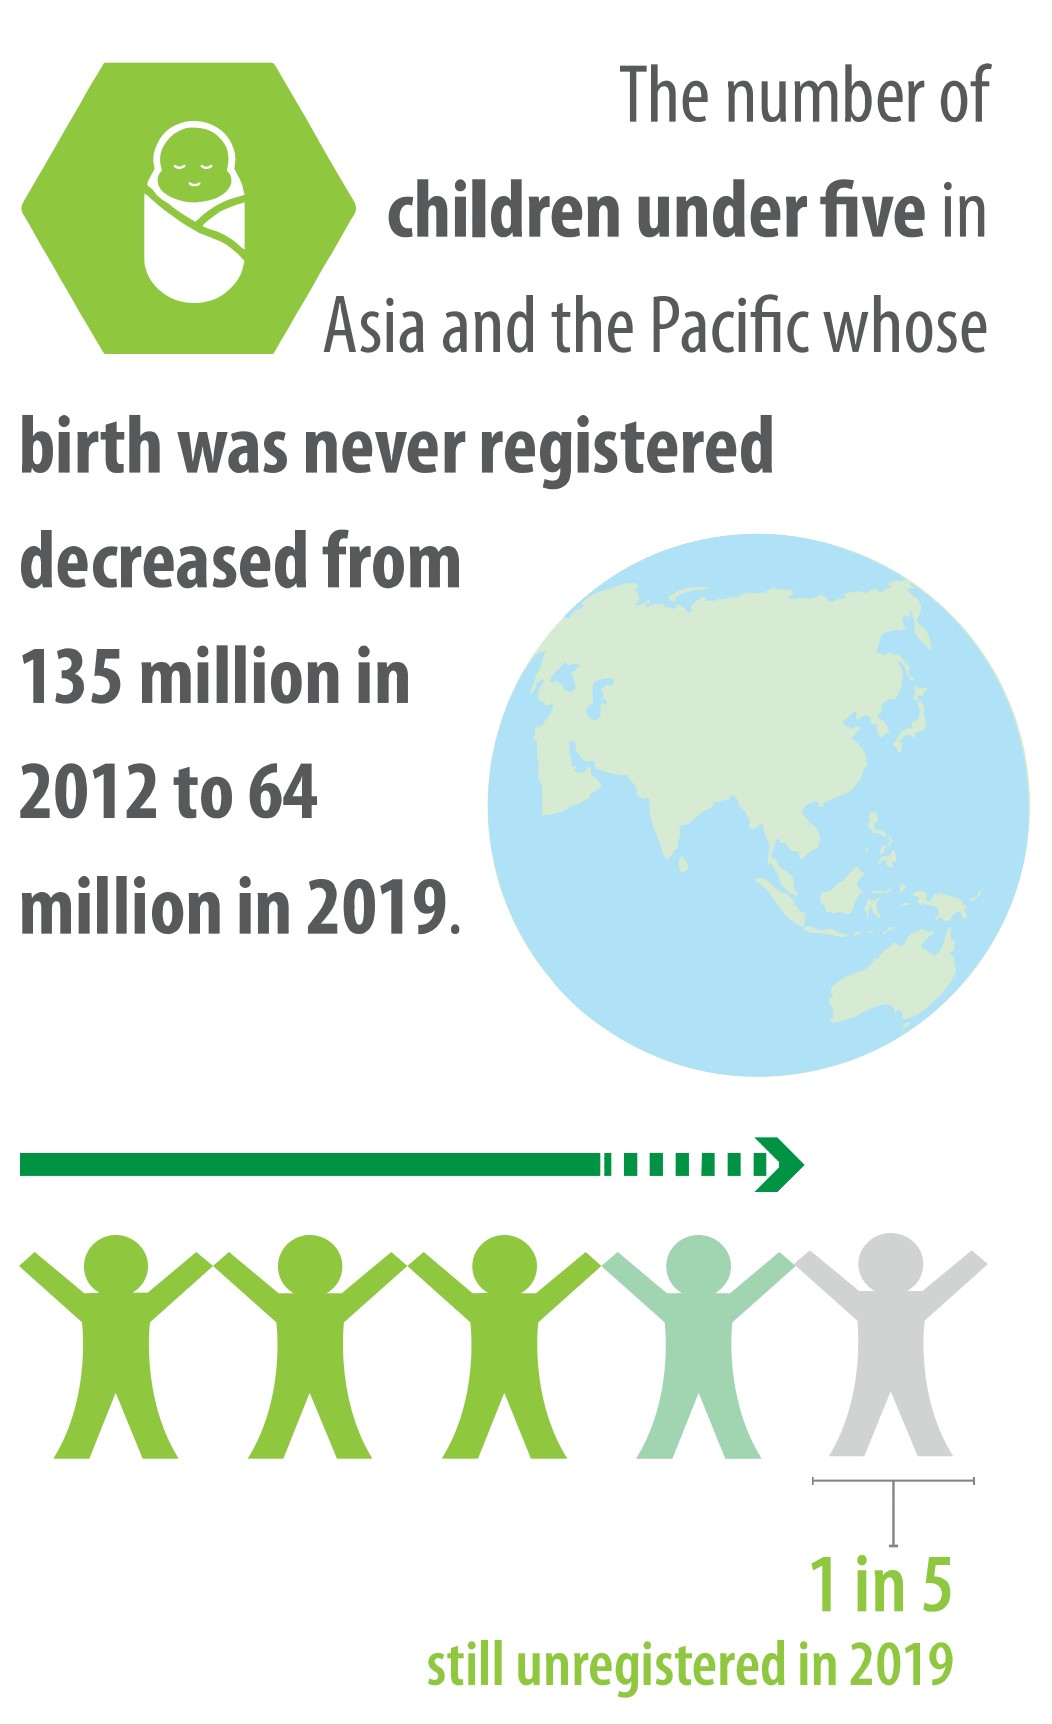 1 in 5 children under five are still not registered in Asia and the Pacific